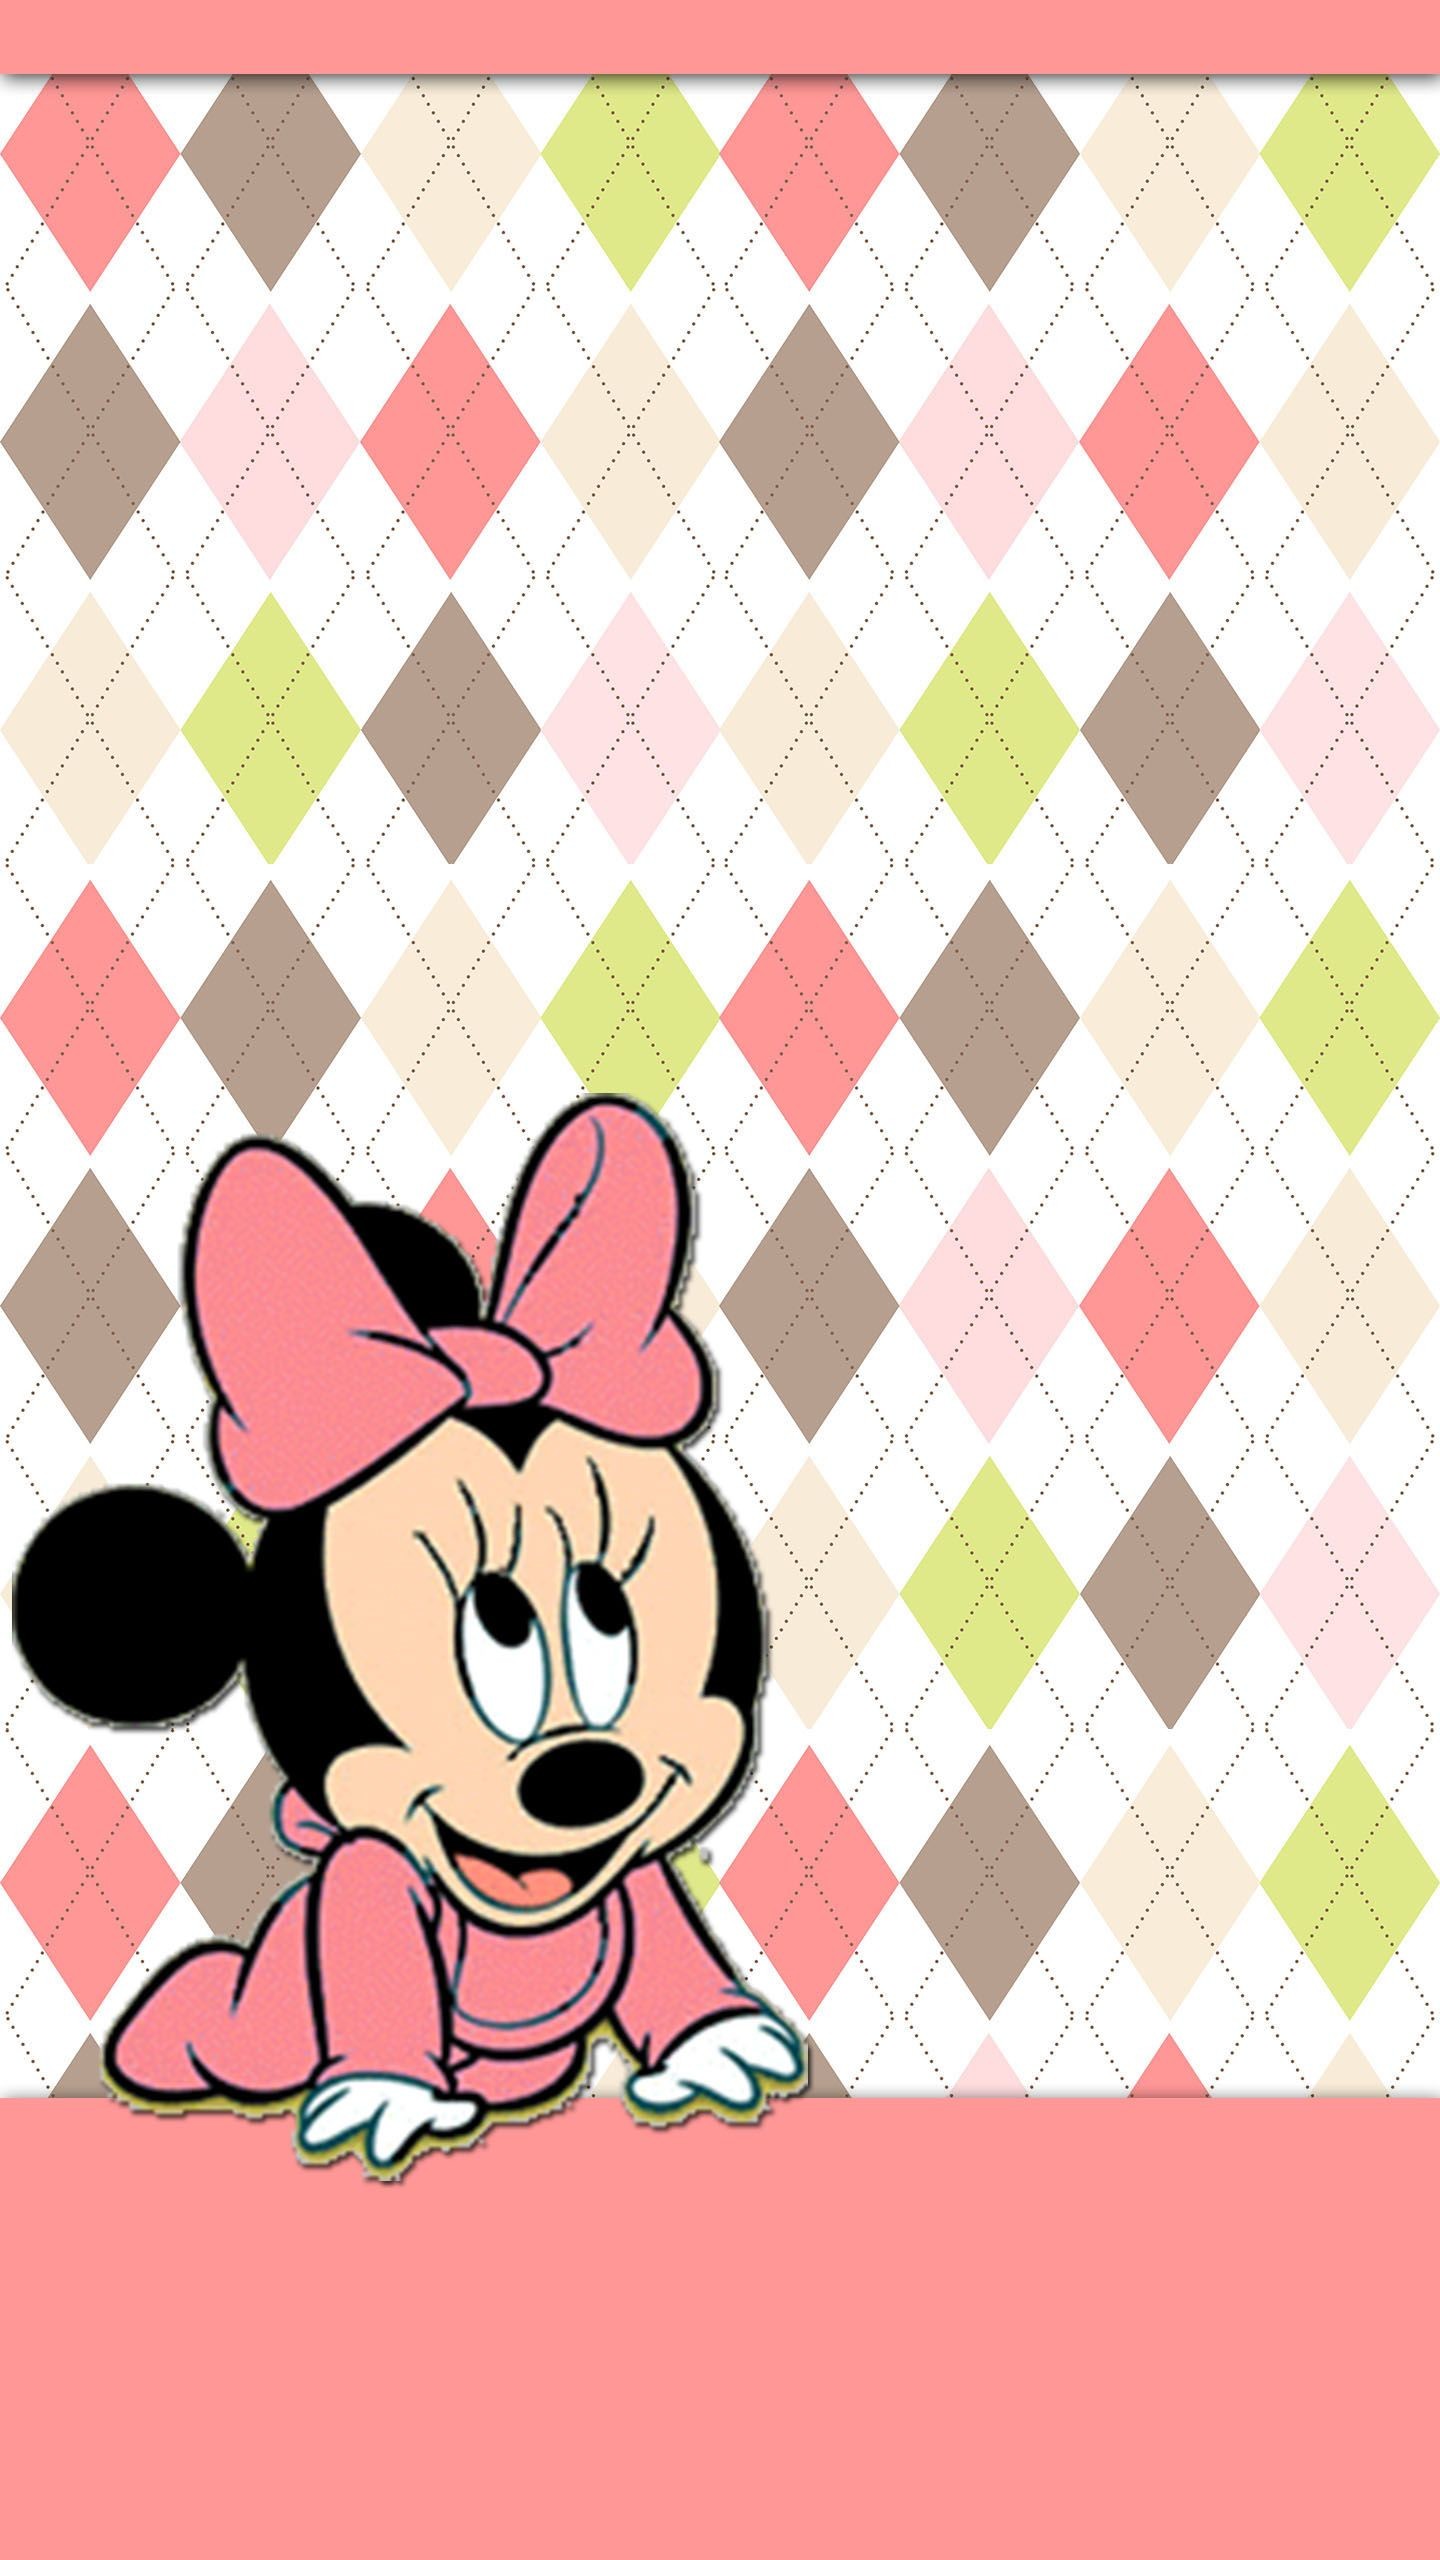 Baby Minnie Mouse Wallpaper (52+ images)